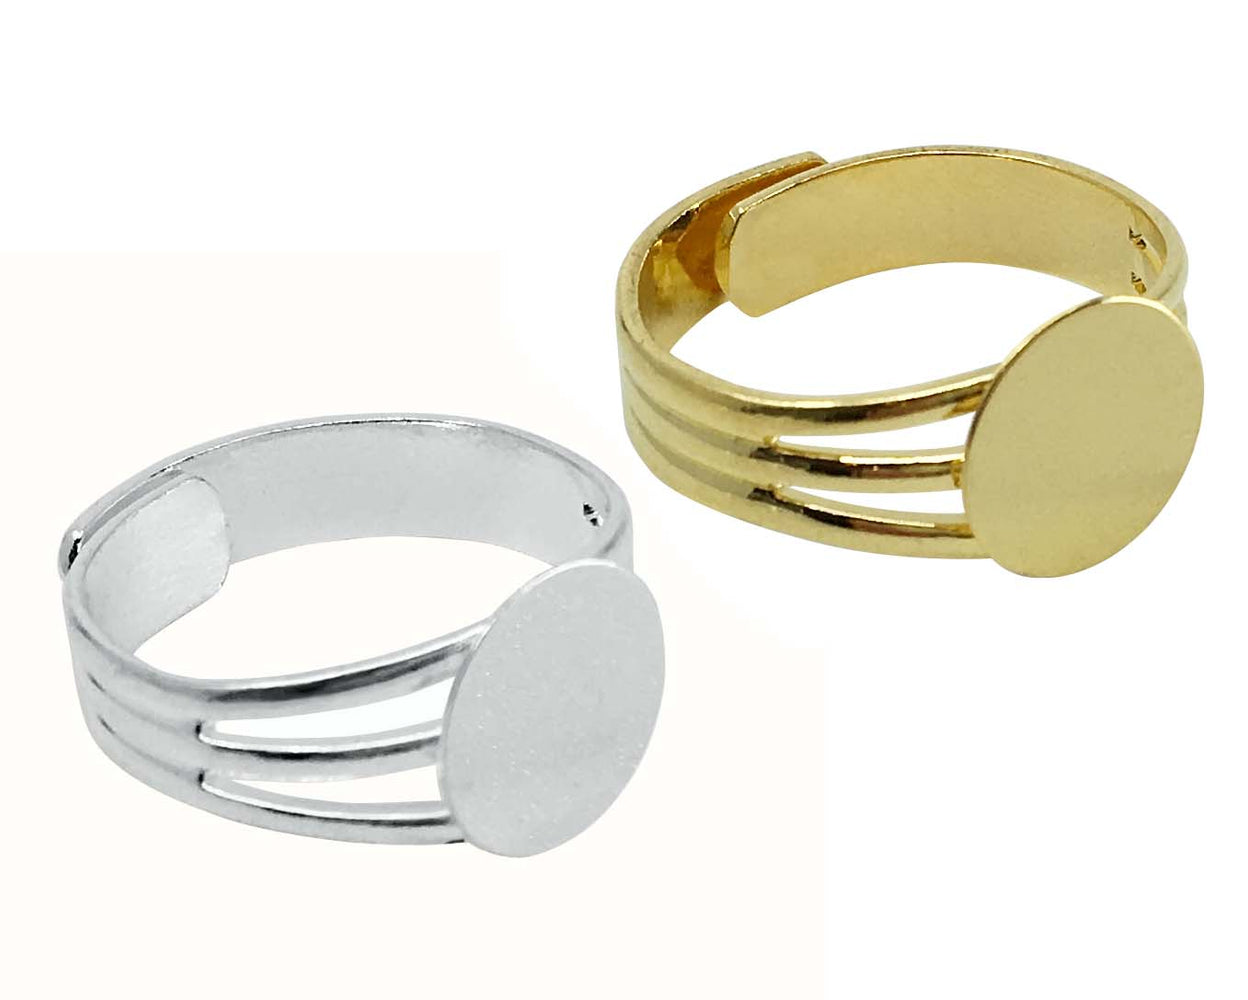 Gold and Silver Plated Ring Blanks with 10mm Flat Adjustable Ring Base - 12 Ring Blanks Total